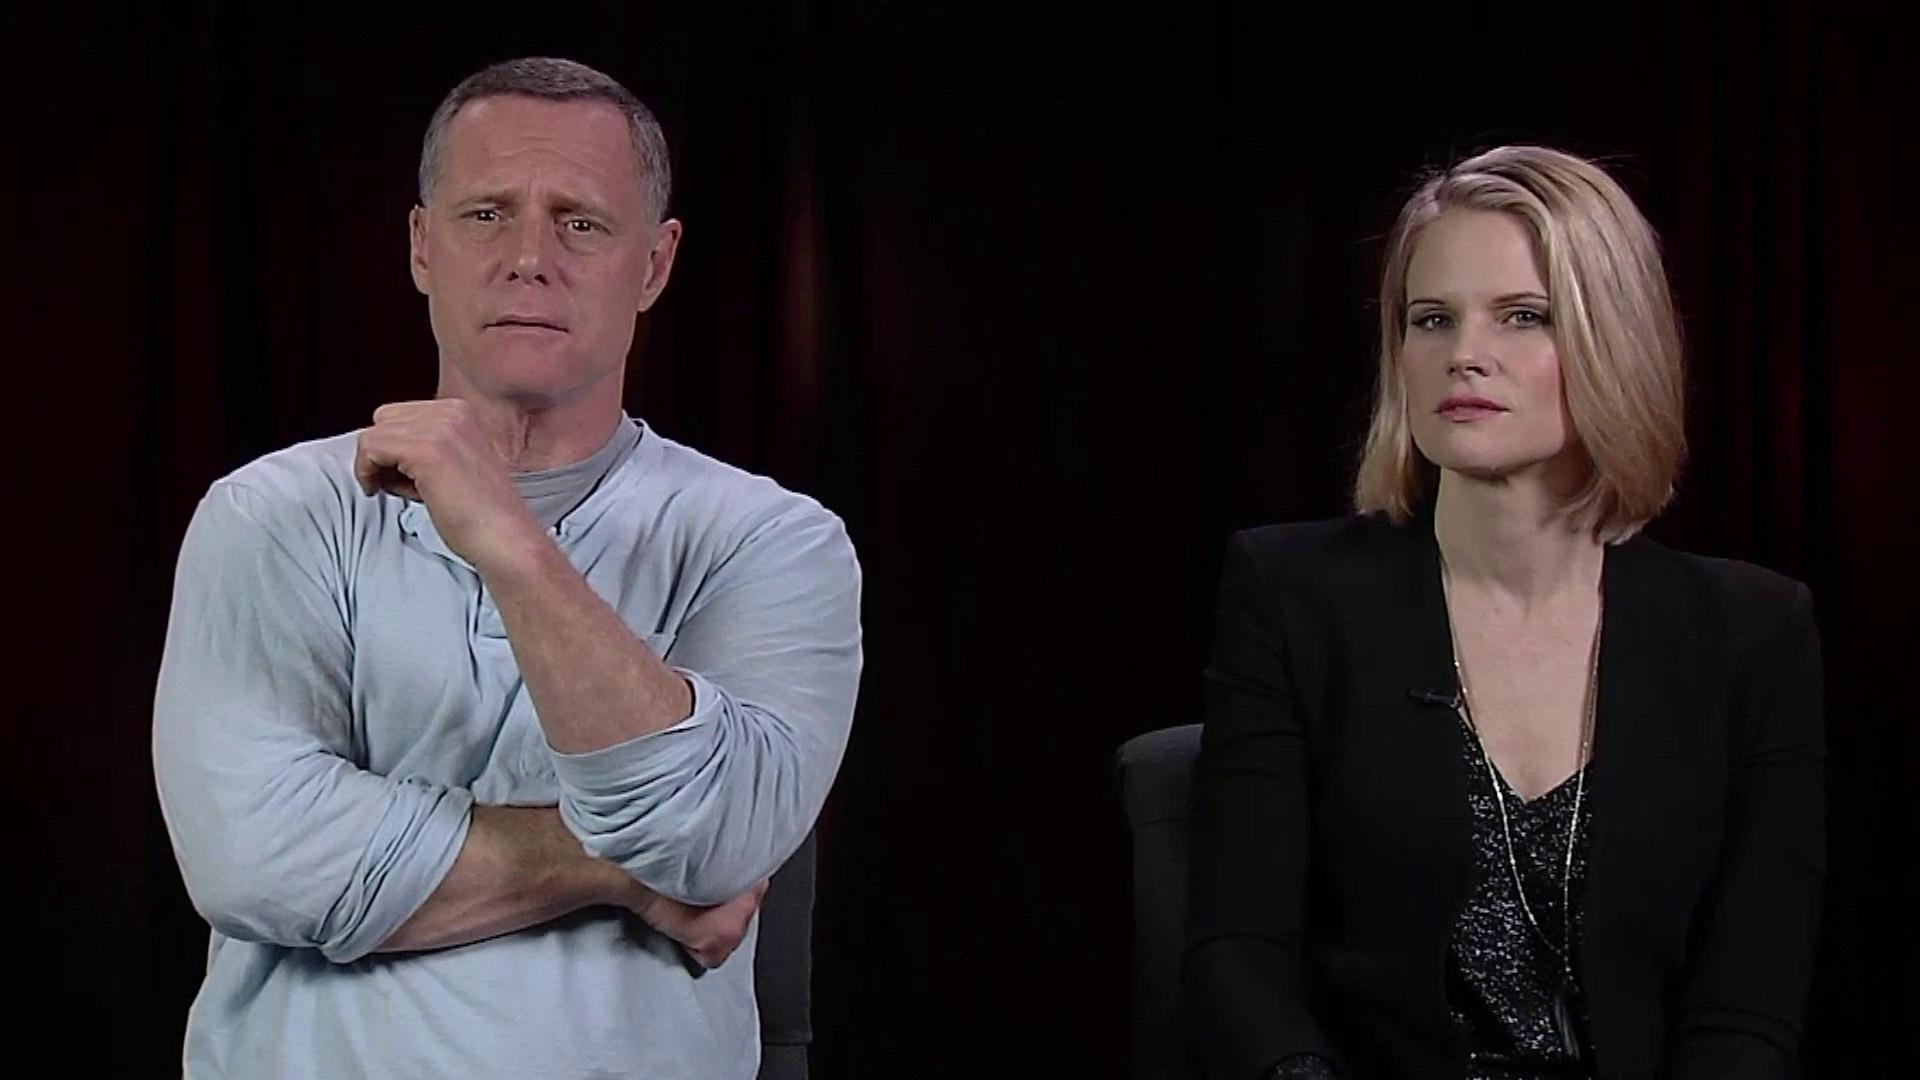 IR Interview: Jason Beghe & Joelle Carter For One Chicago